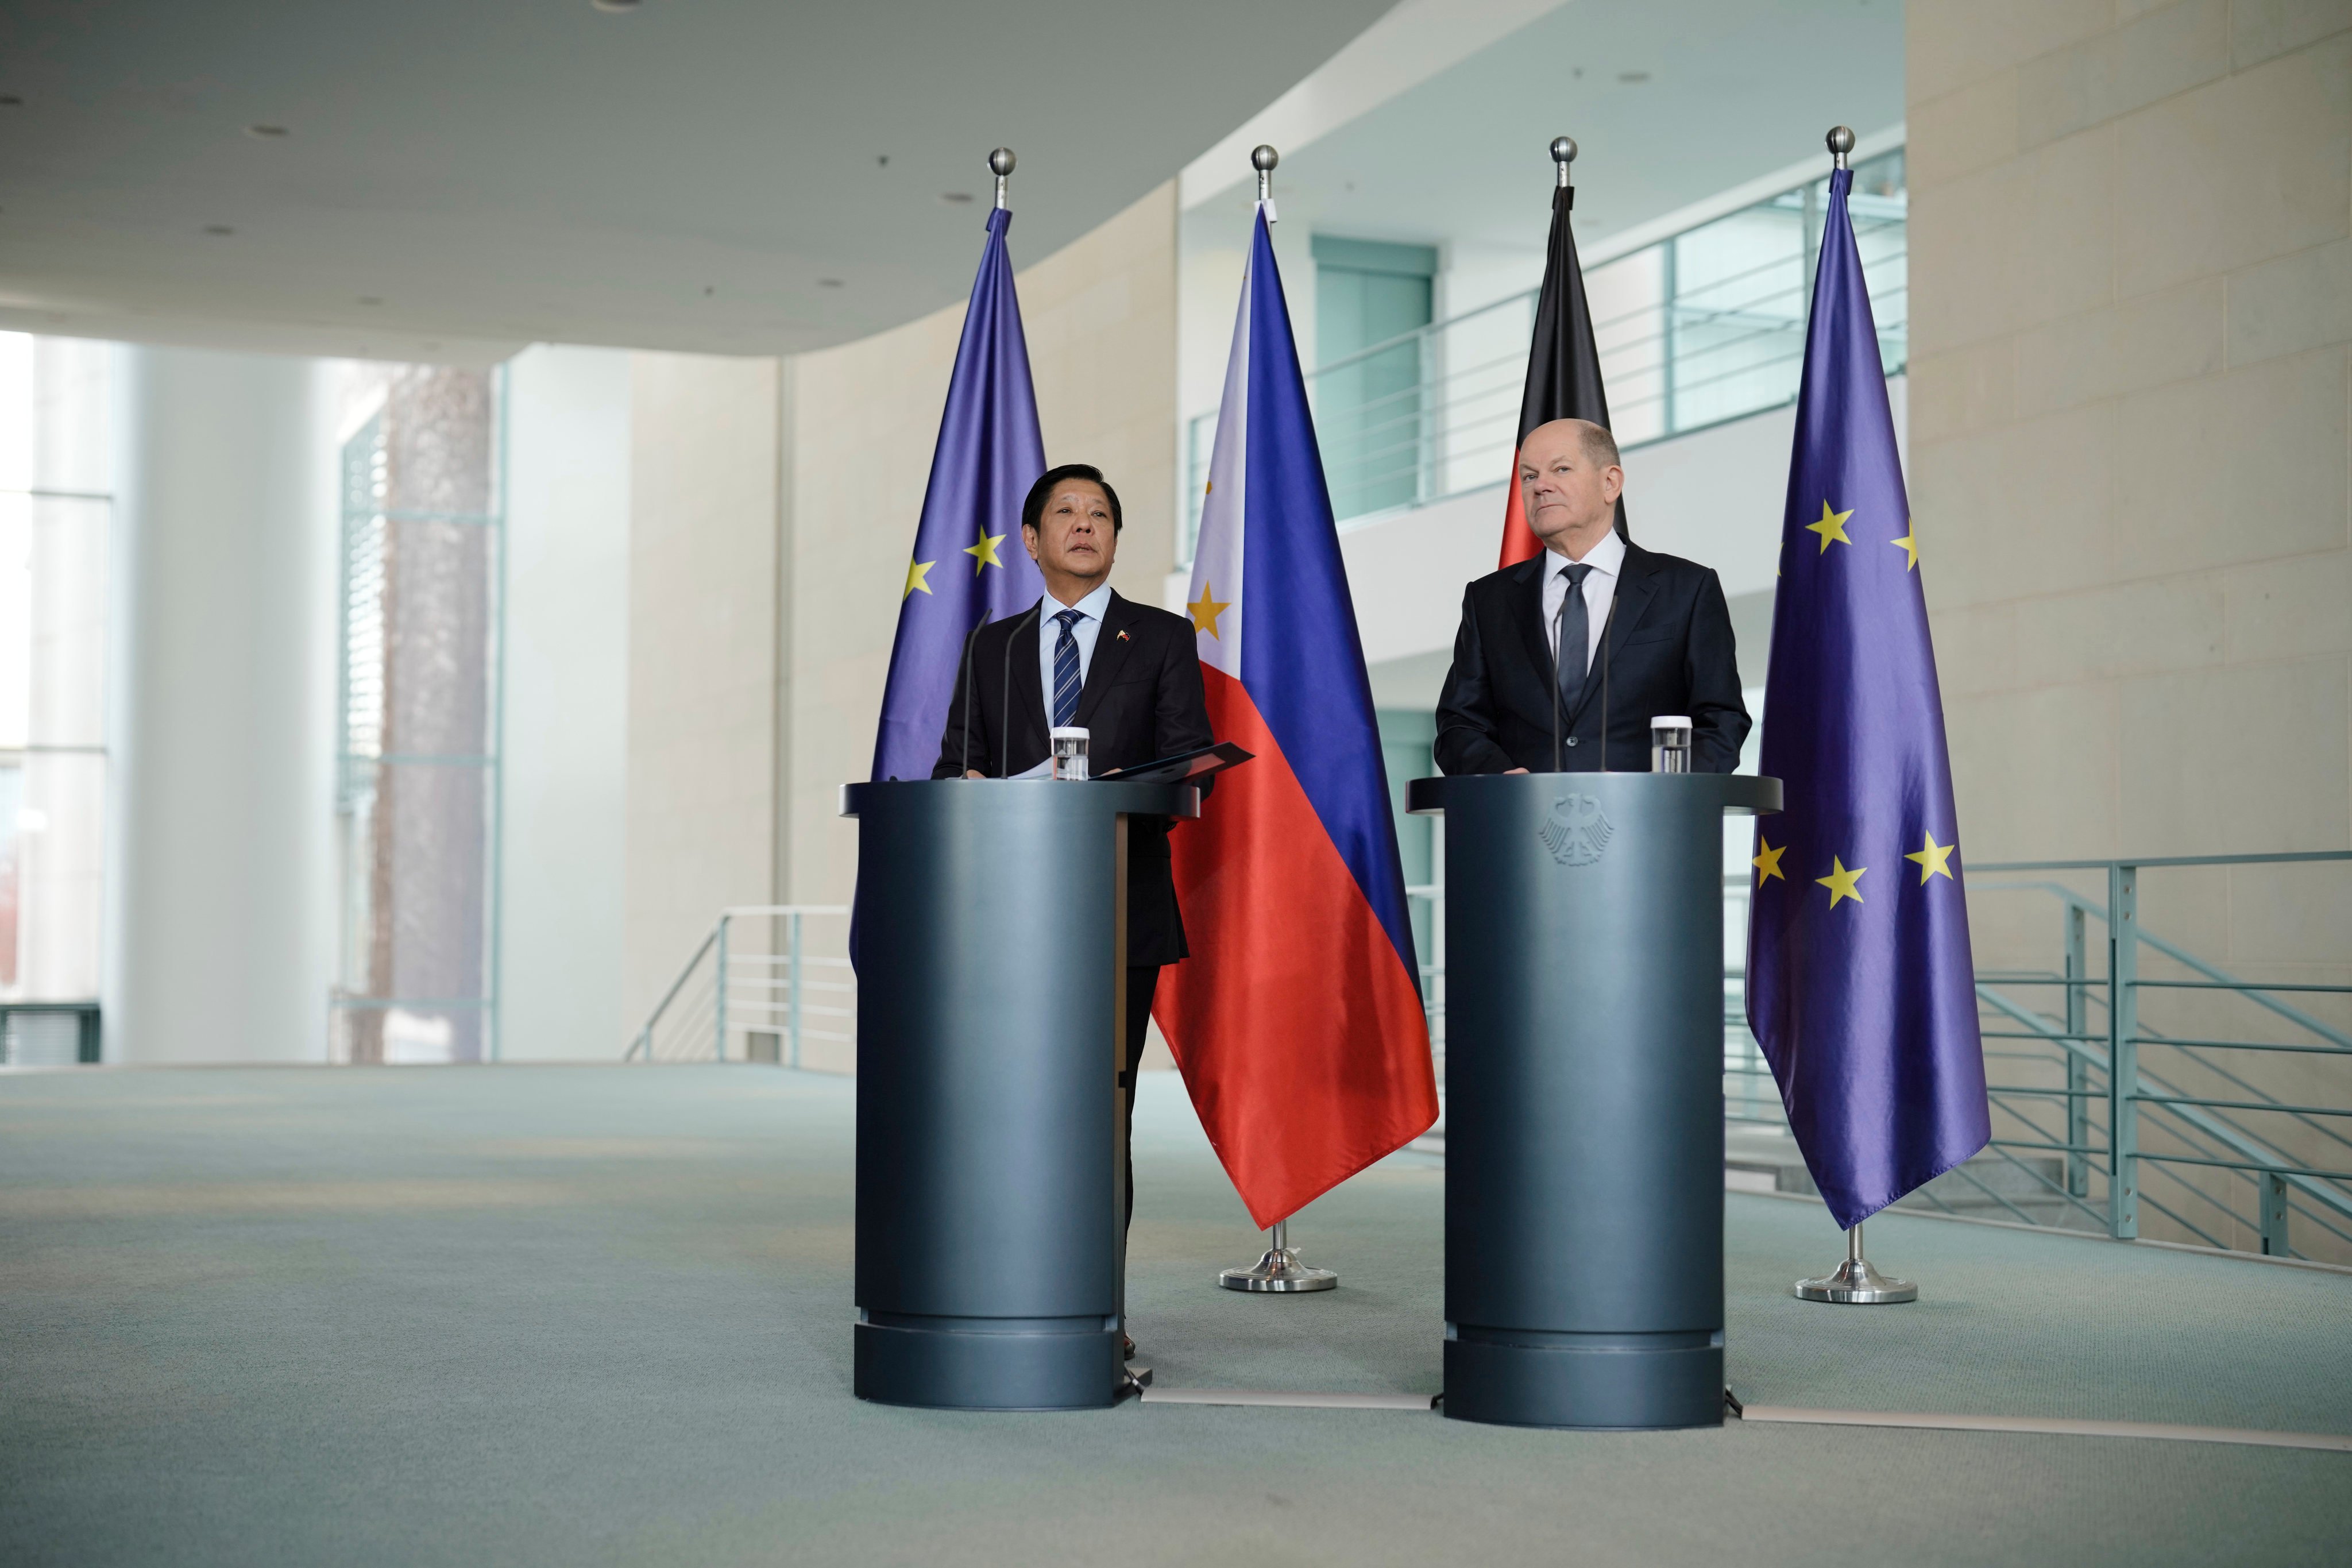 German Chancellor Olaf Scholz (right) and Philippine President Ferdinand Marcos Jnr brief the media after a meeting at the chancellery in Berlin on March 12. During Scholz’s tenure, Germany has steadily moved away from focusing exclusively on economic concerns and seeking more global influence. Photo: AP